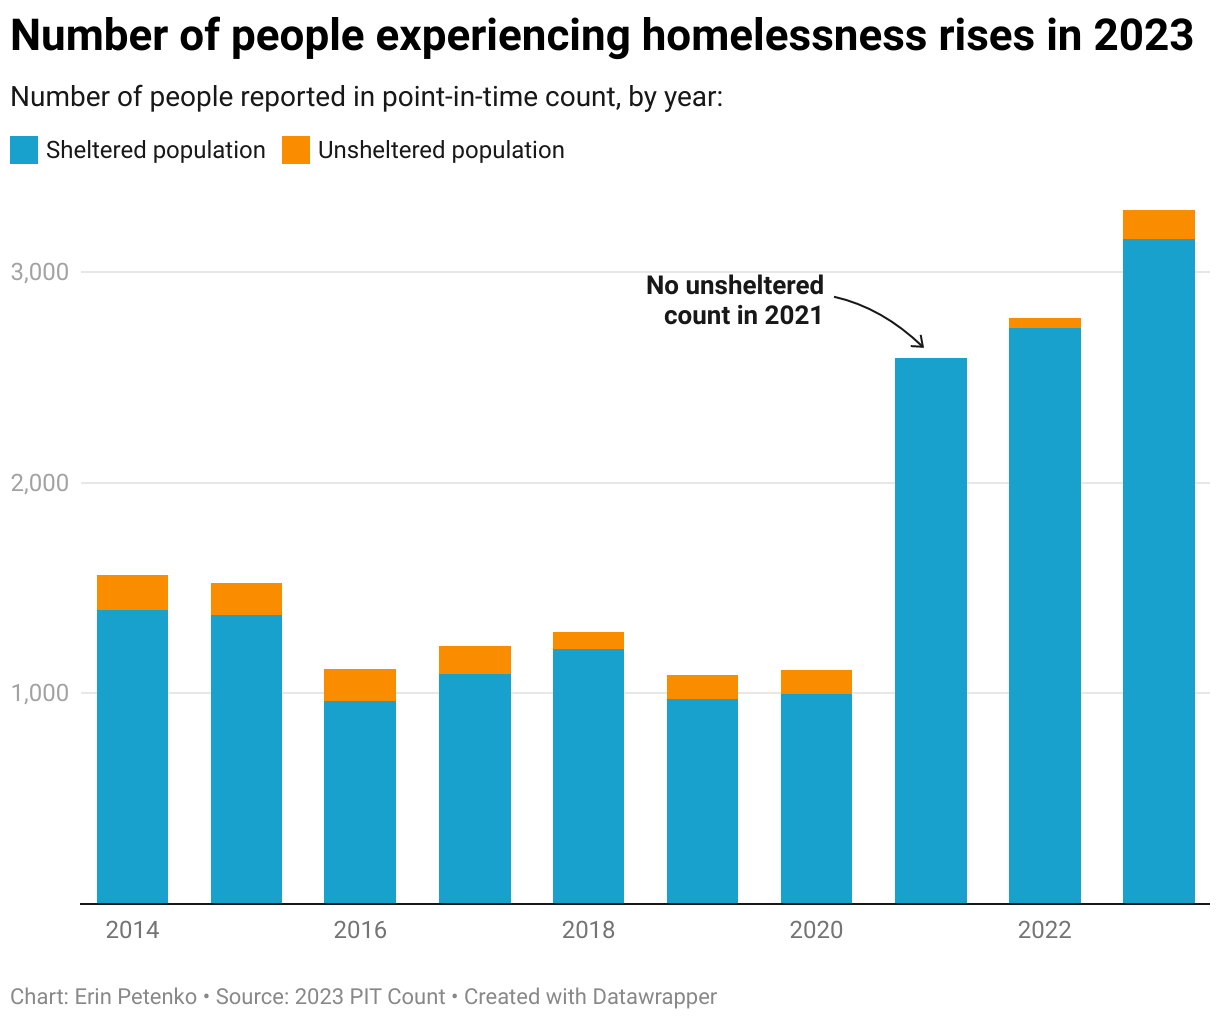 The number of people experiencing homelessness hit a 10-year high in 2023, which 3,518 sheltered and 137 sheltered people counted in the state's point-in-time count.